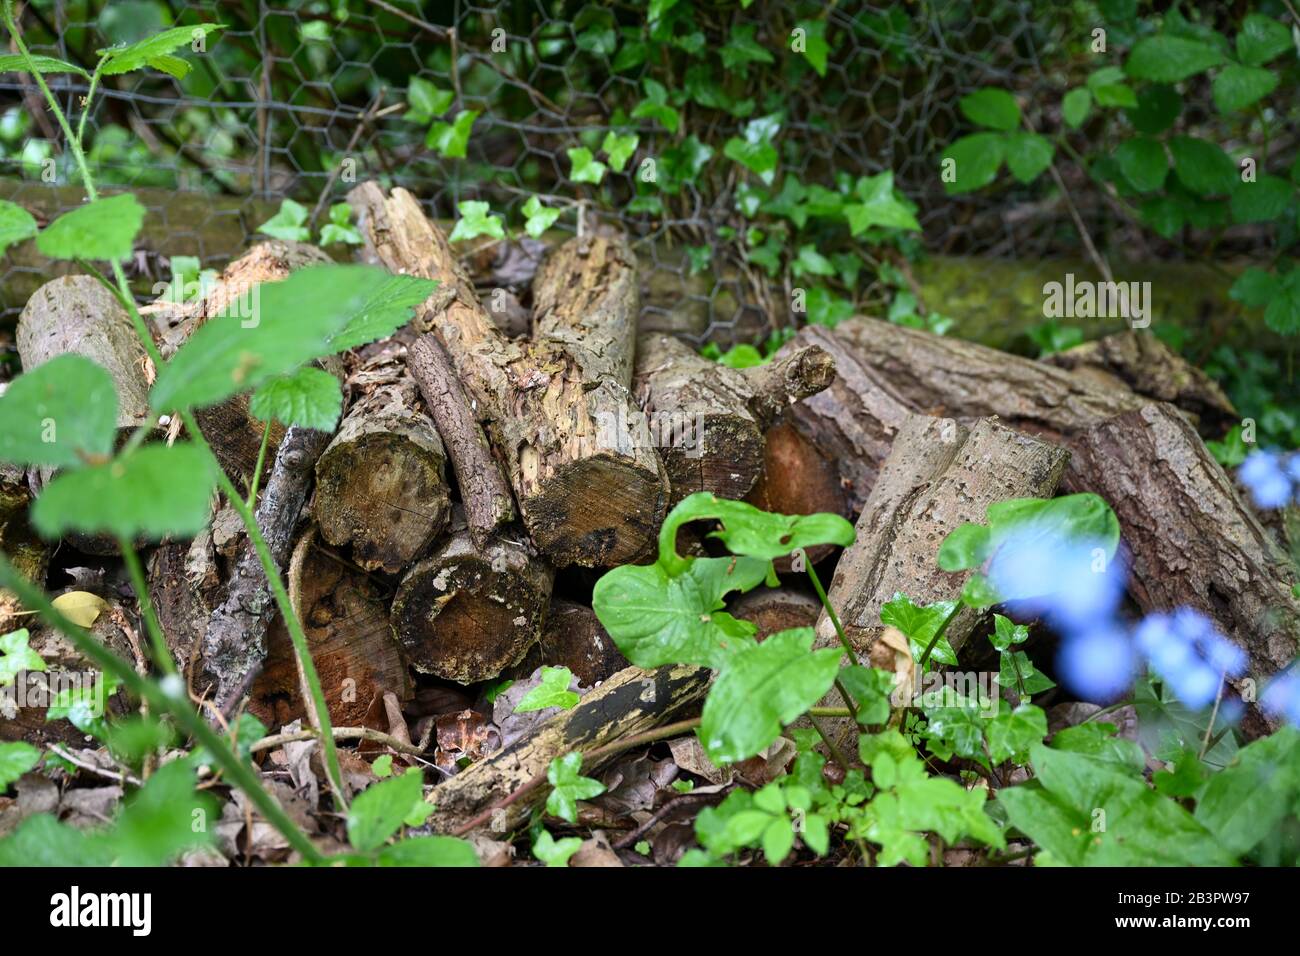 A pile of old logs in an overgrown area of a garden left there to provide habitat for insects and reptiles. Stock Photo